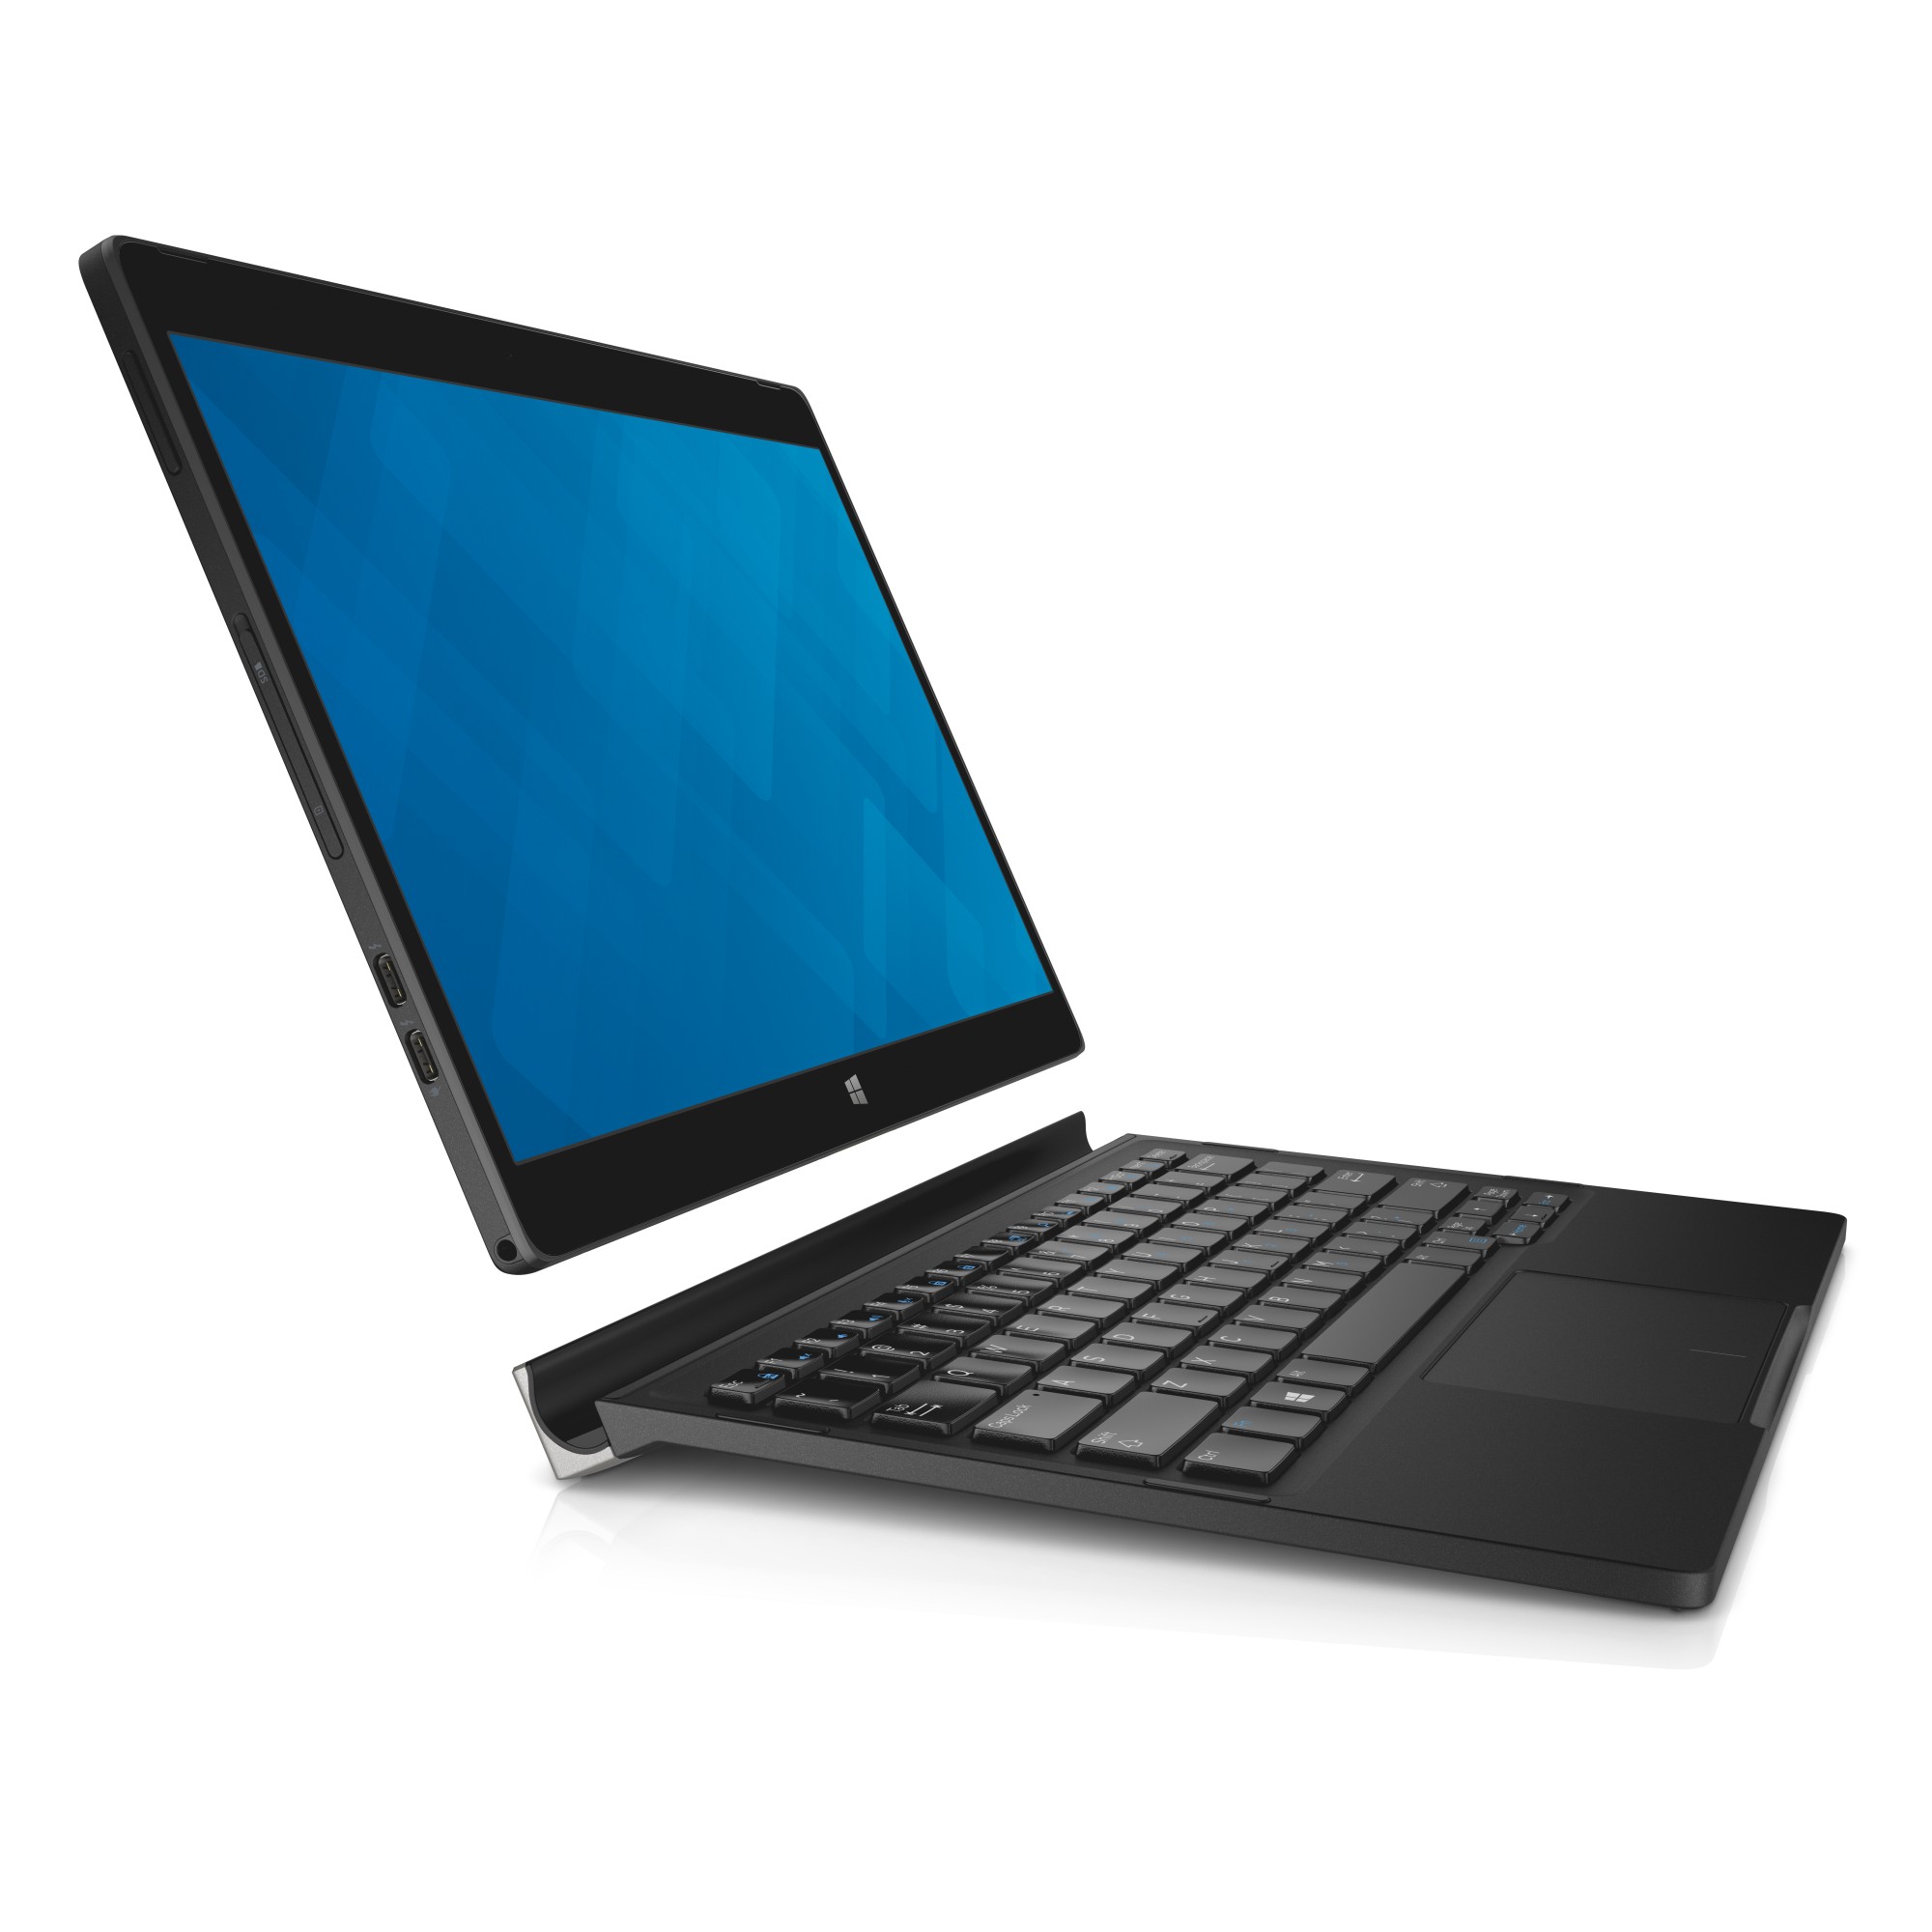 Dell Launches The Sleek and Powerful Latitude Series in India – Gadgets